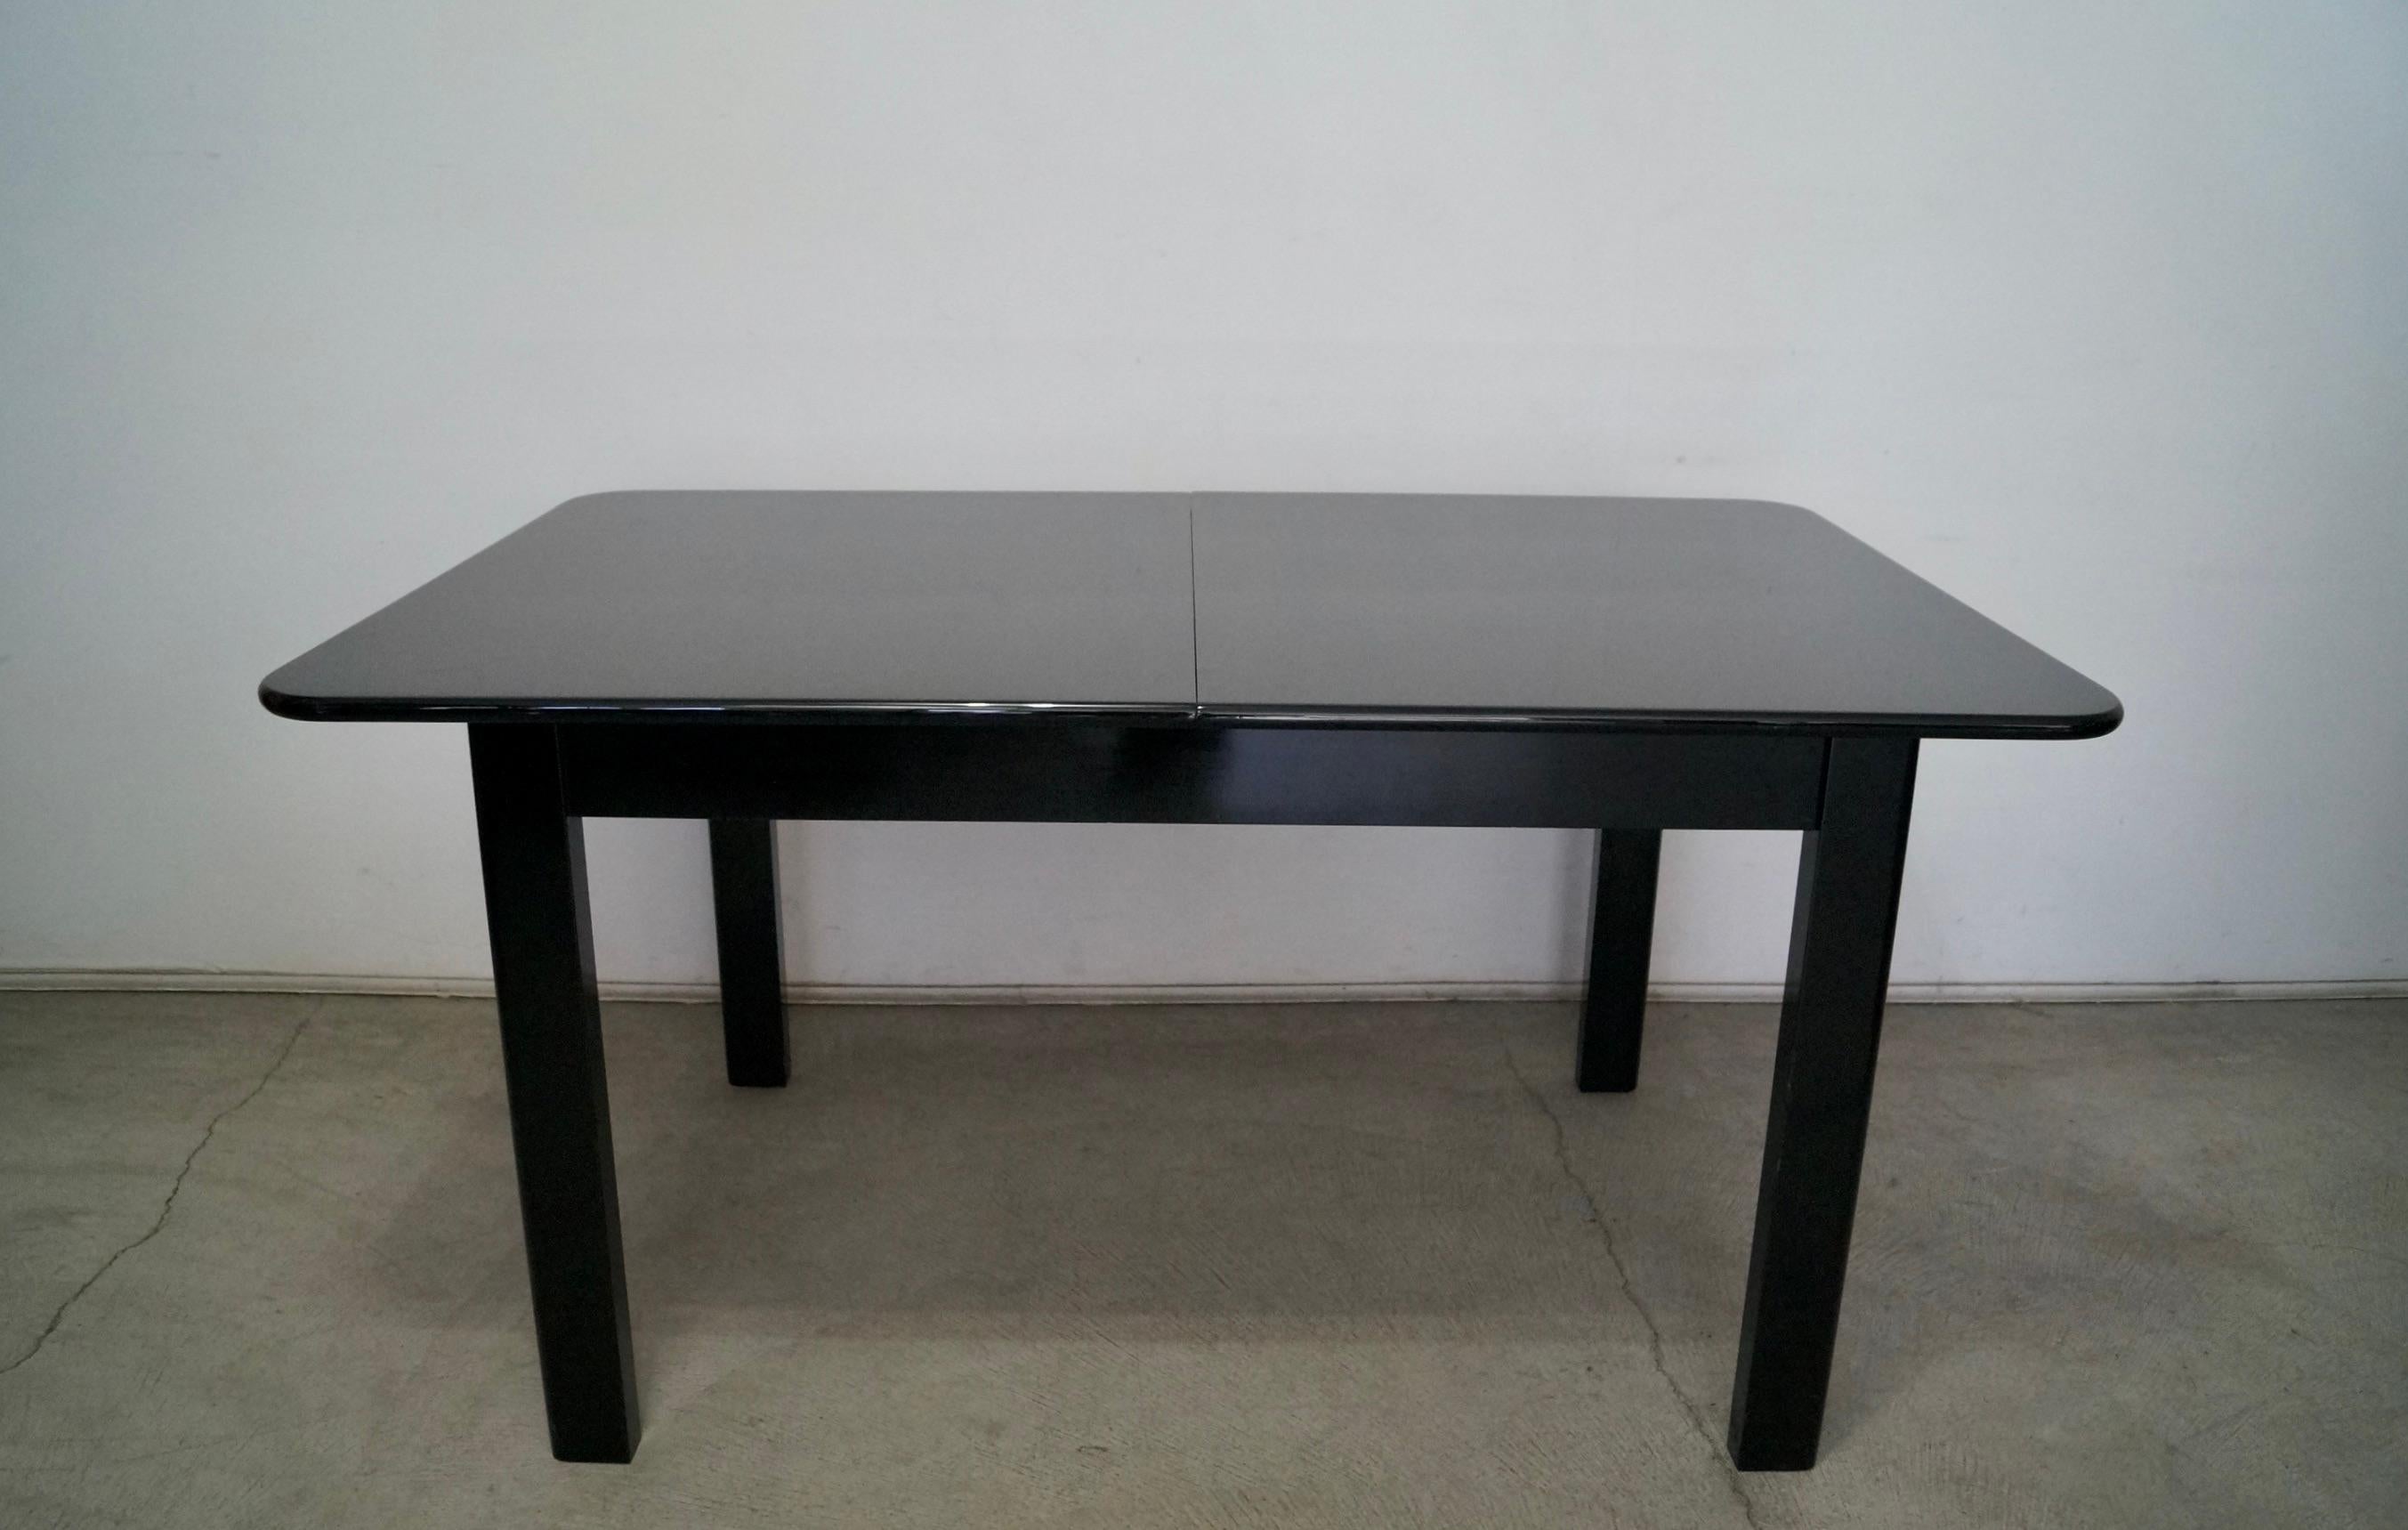 Vintage 1970's Post modern dining table for sale. Manufactured by Montina in the 1970's, and made in Italy. Made of solid wood, and has the original black lacquer in excellent condition. It has a great Hollywood Regency Art Deco design with rounded